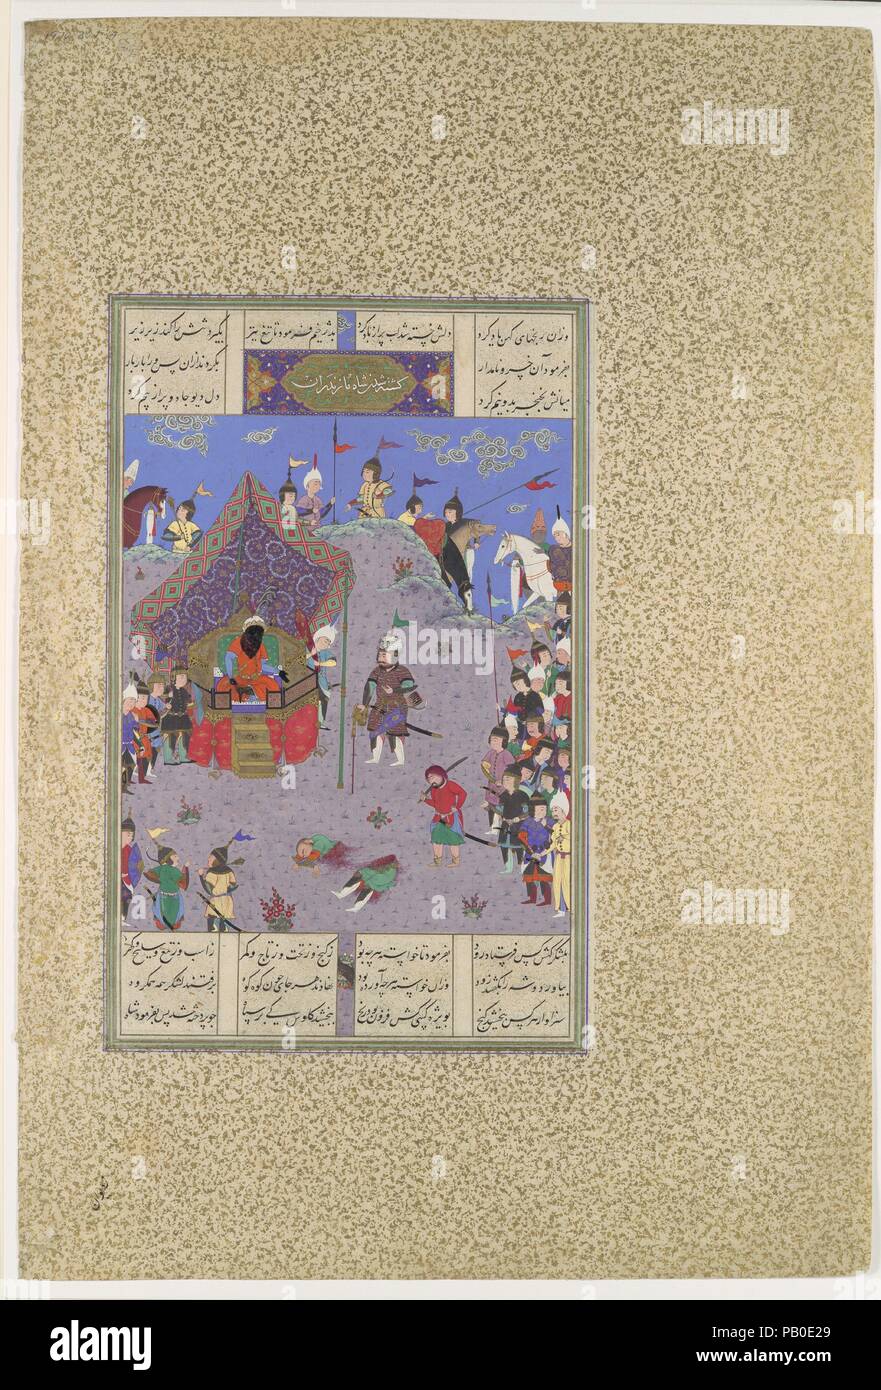 'Rustam Brings the Div King to Kai Kavus for Execution', Folio 127v from the Shahnama (Book of Kings) of Shah Tahmasp. Artist: Painting attributed to Qasim ibn 'Ali (active ca. 1525-60); Painting attributed to Mir Musavvir (active 1525-60). Author: Abu'l Qasim Firdausi (935-1020). Dimensions: Painting: H. 11 3/16 x W. 7 1/8 in. (H. 28.4 x W. 18.1 cm)  Entire Page: H. 18 5/8 x W. 12 9/16 in. (H. 47.3 x W. 31.9 cm). Date: ca. 1525-30.  Even with the death of the White Div and the Div General Arzhang, the demons of the Div King of Mazandaran continue to harry the Iranians. At last, Kai Kavus lead Stock Photo